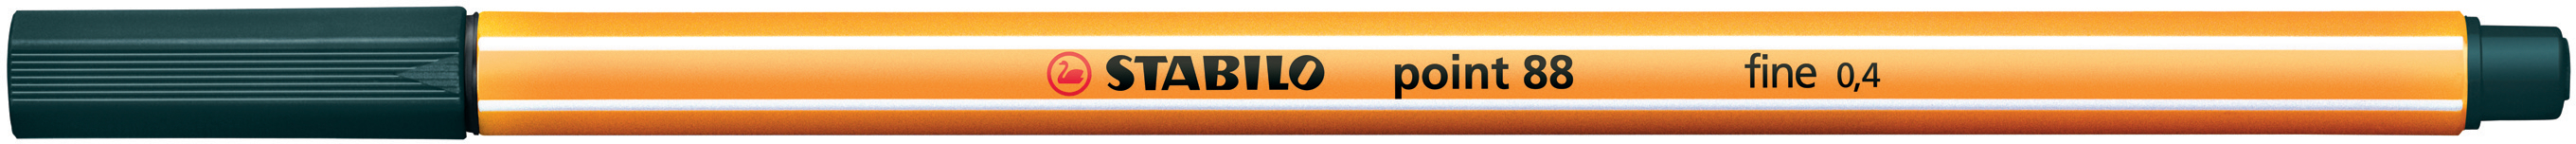 STABILO Stylo Fibre point 88 0,4mm 88/63 olive olive